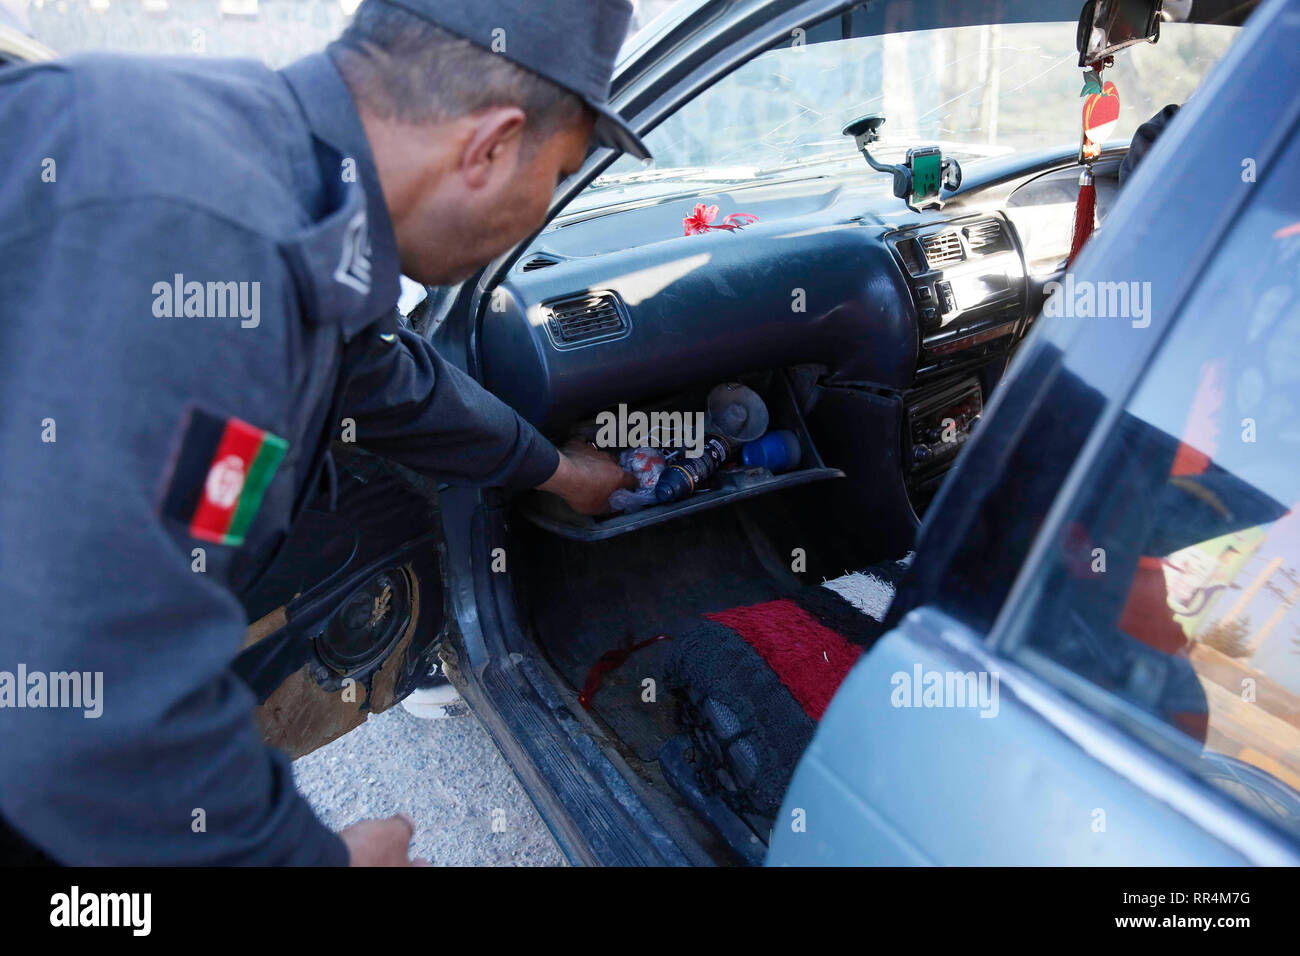 Herat, Afghanistan. 24th Feb, 2019. An Afghan policeman searches a vehicle at a security checkpoint along Herat-Farah main road in Herat, Afghanistan, Feb. 24, 2019. Afghan security forces have killed nine Taliban militants and seized nearly 900 kg narcotic drugs during separate operations, the Afghan Ministry of Interior Affairs said Saturday. In Herat province, the Afghan National Police (ANP) seized more than 570 kg of narcotics and opium and a vehicle after the ANP laid an ambush and engaged with drug traffickers along a main road. Credit: Elaha Sahel/Xinhua/Alamy Live News Stock Photo